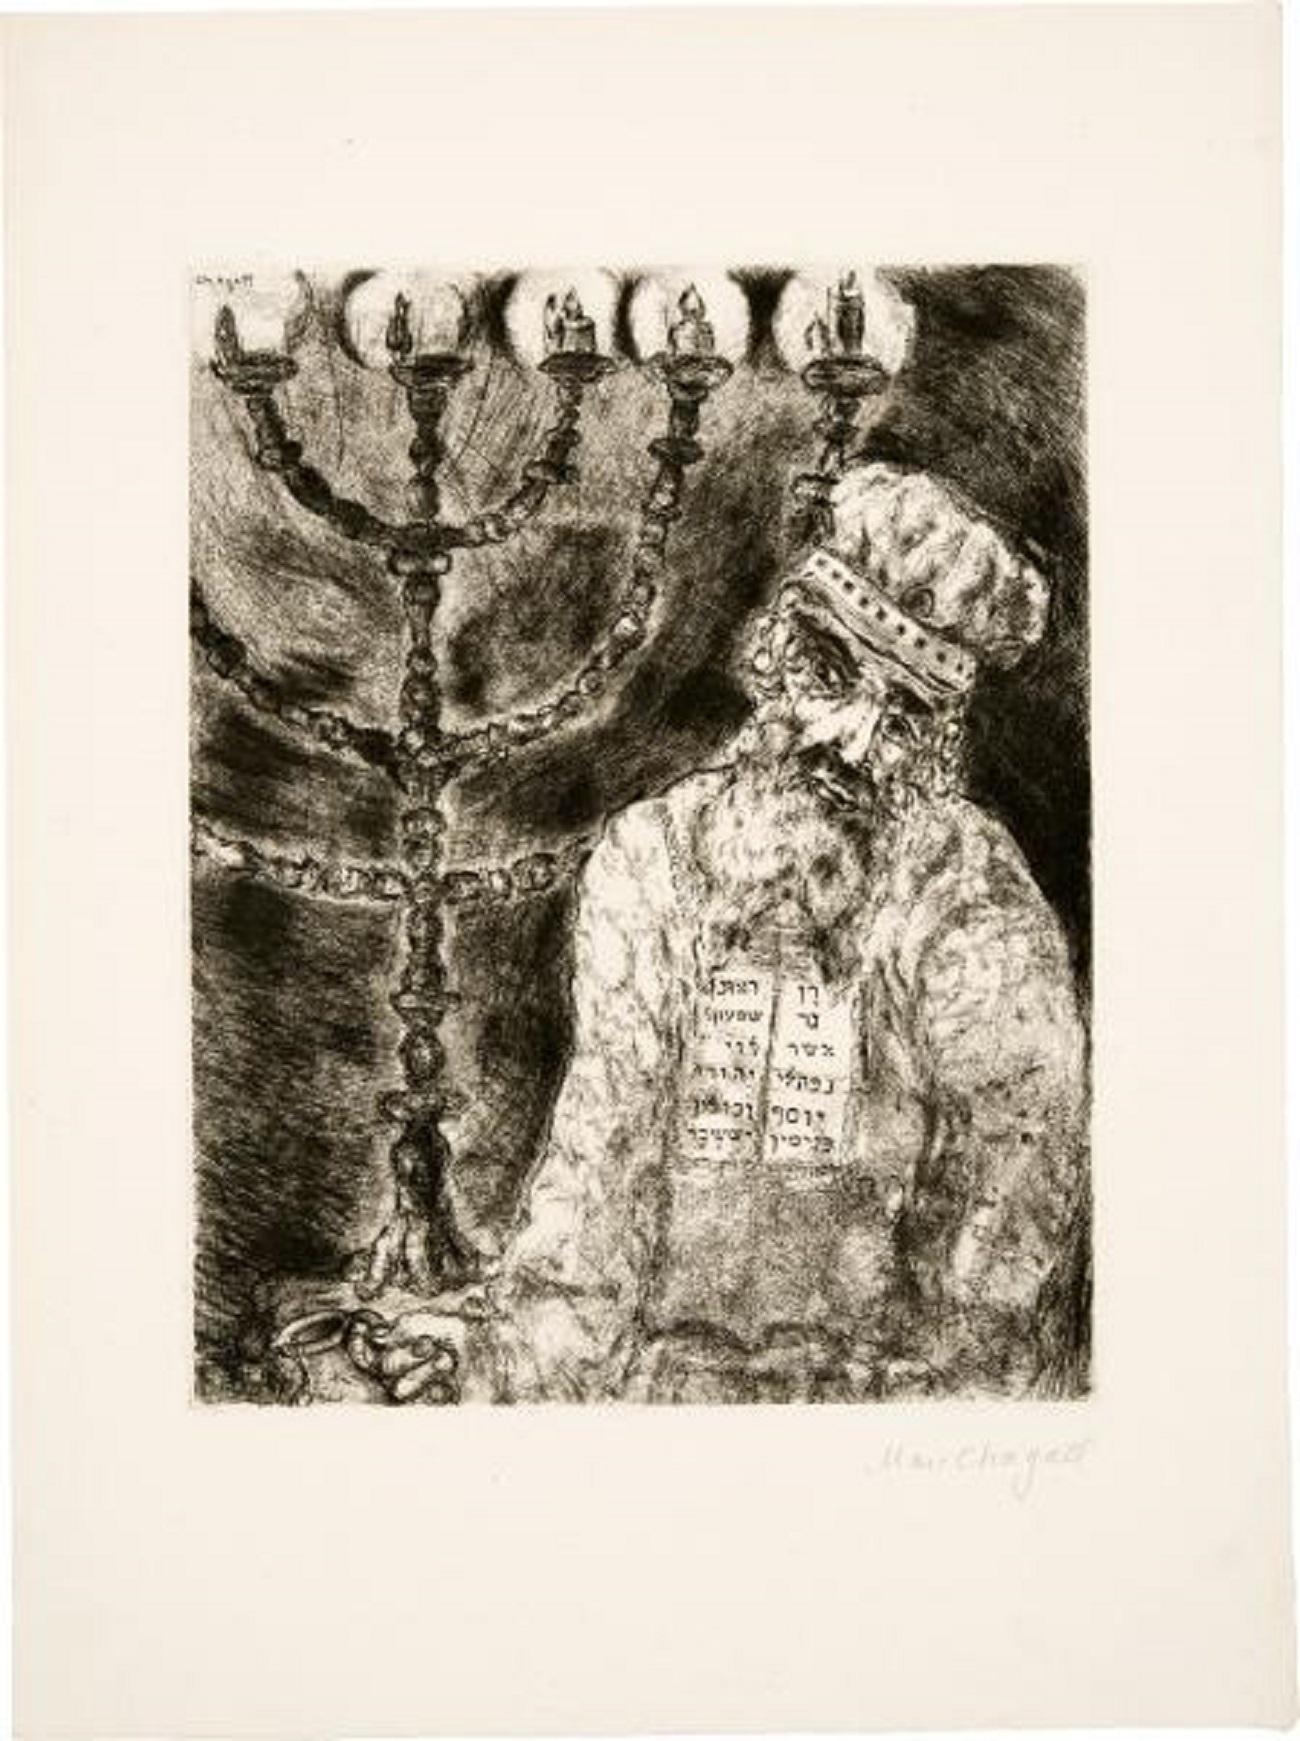 MARC CHAGALL (1887-1985)
1 llustrationen aus “La Bible”, Probedrucke

“Aaron et le chandelier Sorlier  238”

1 Sheet of etching, 1931-1939, 
Each c. 44-44, 5xc. 30, 5-33, 5 cm

Signature: Signed by the artist  in pencil “Marc Chagall” sheet  26